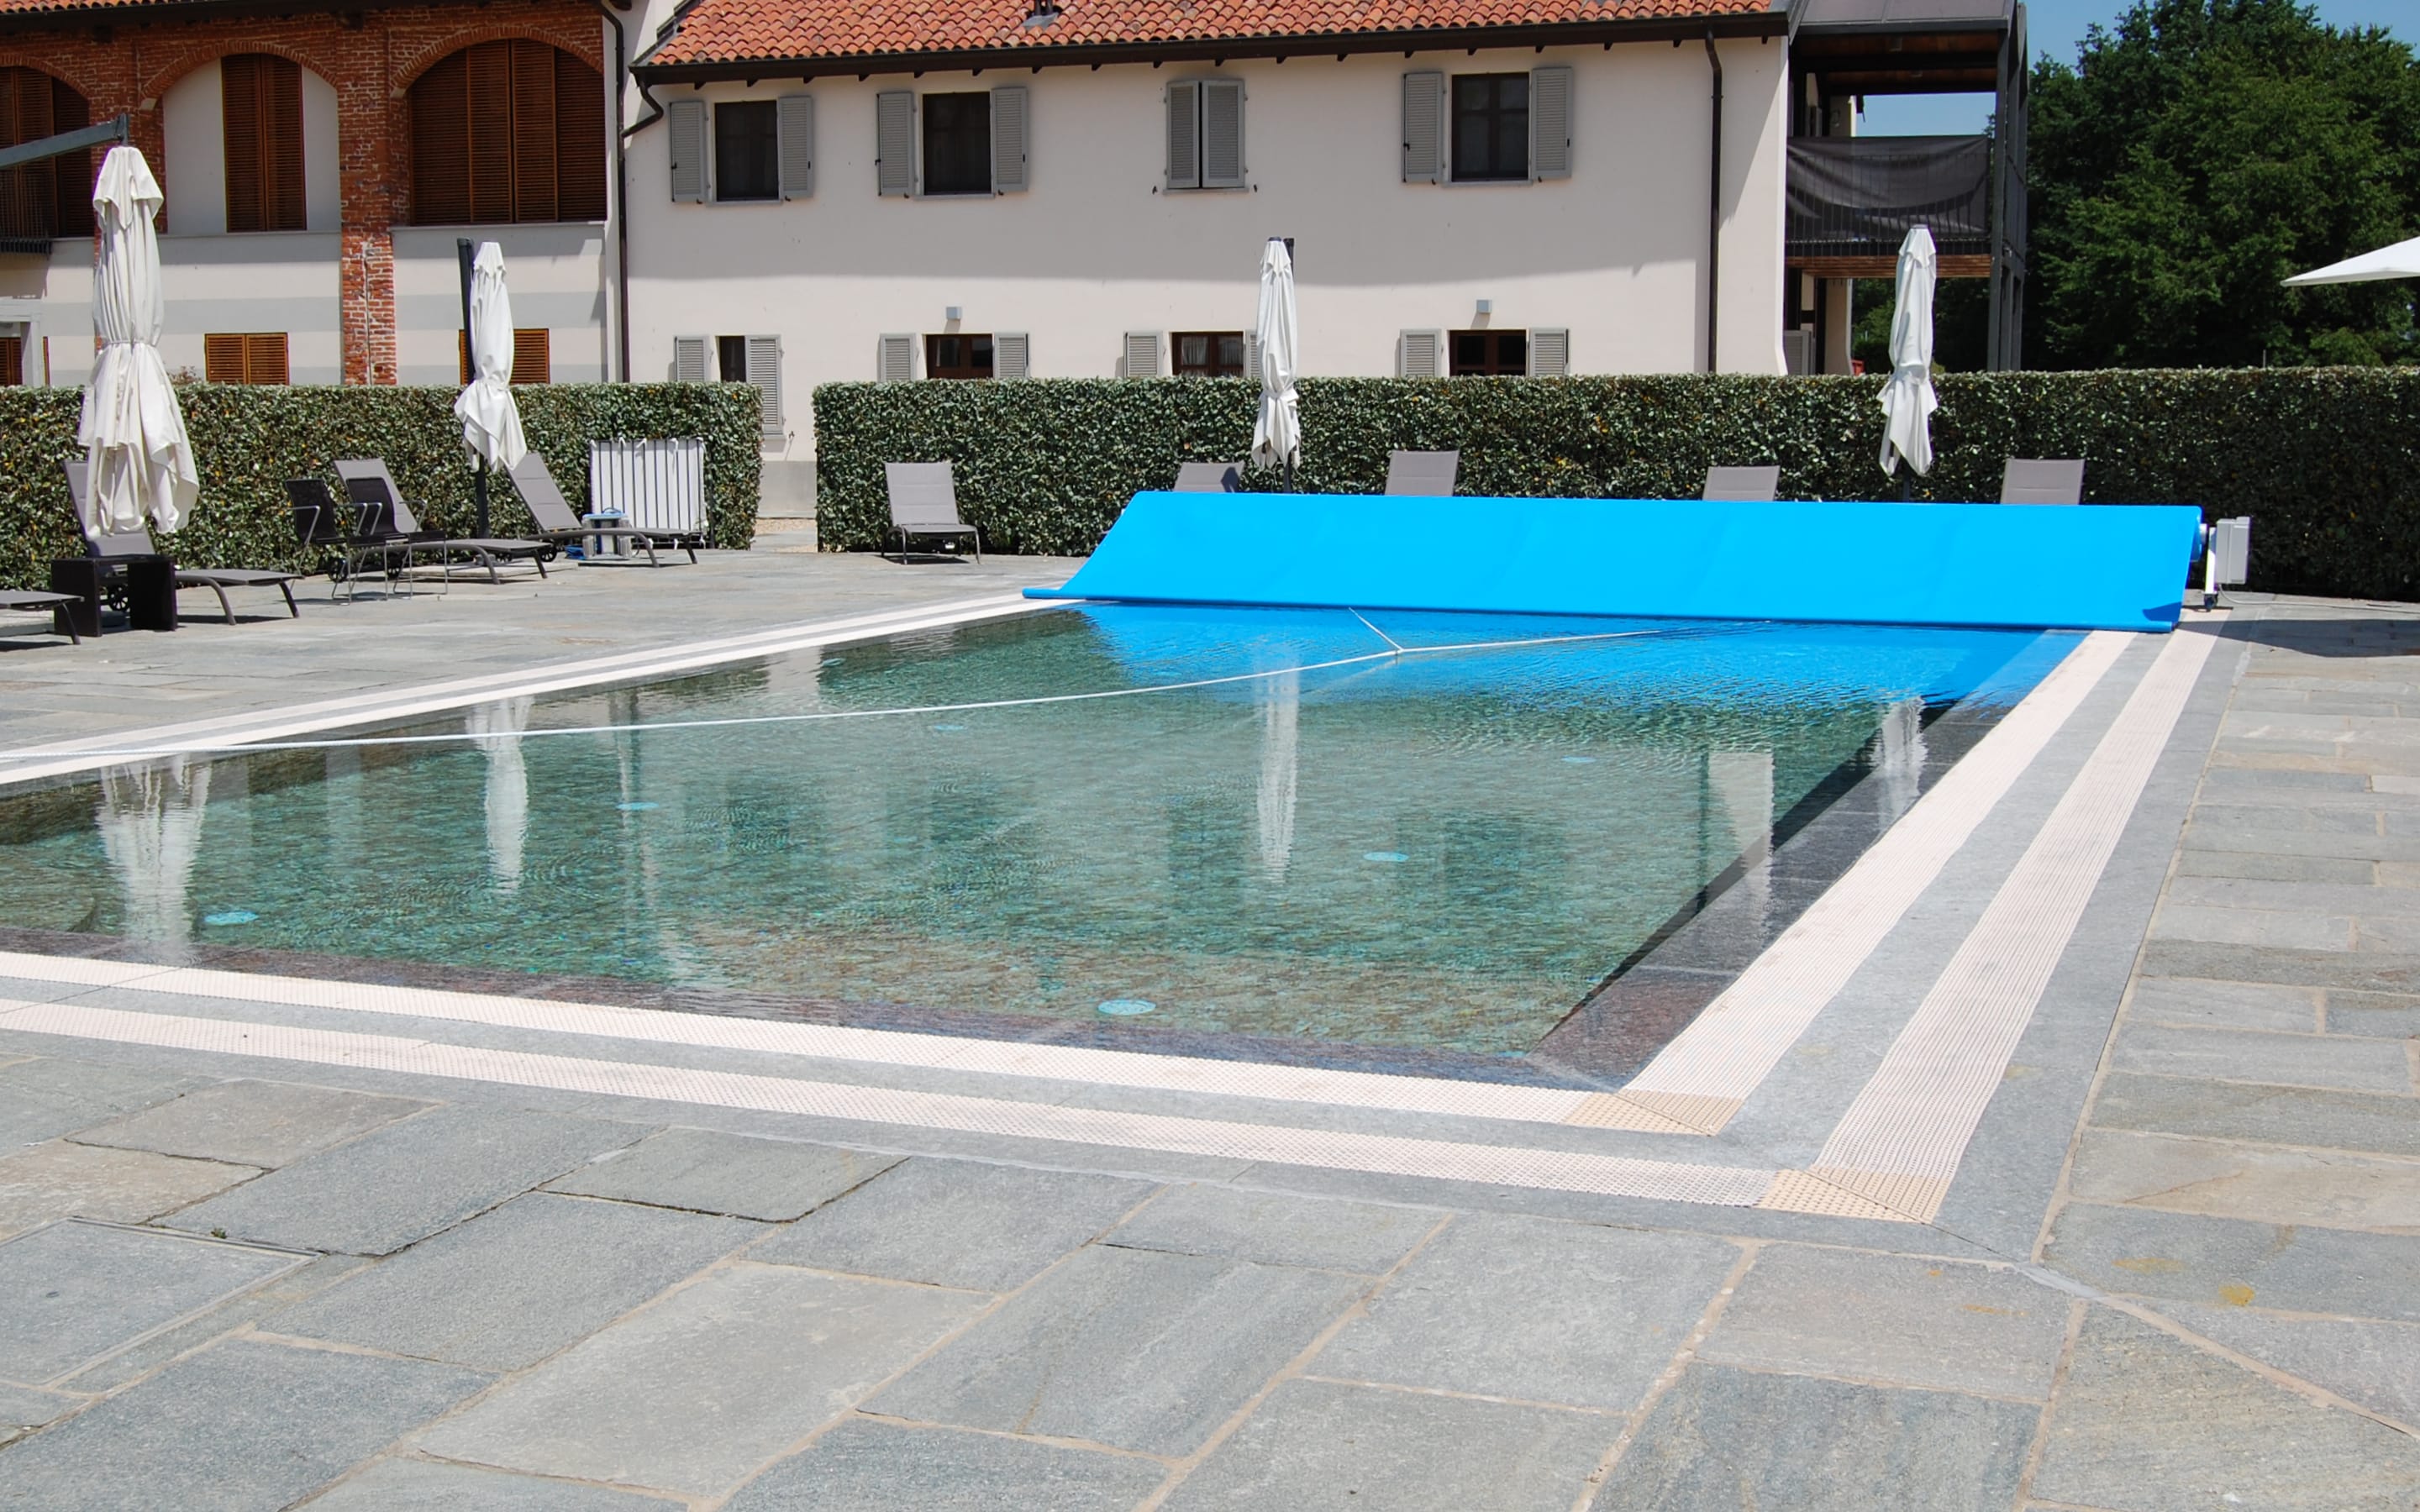 Multi-layer foam isothermal covers for public pools